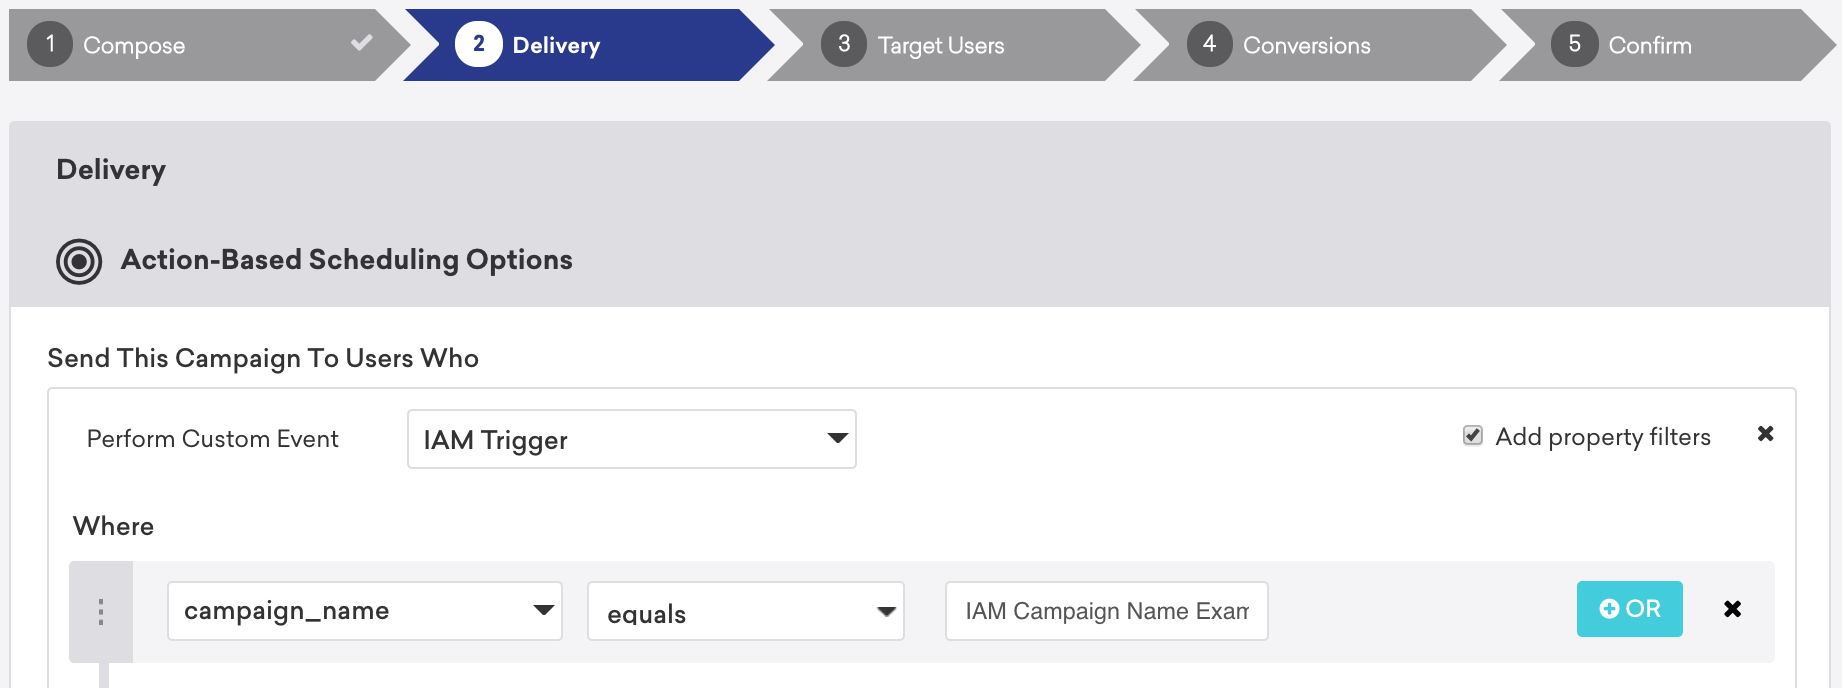 An action-based delivery in-app message campaign that will be delivered to users who perform the custom event "In-app message trigger" where "campaign_name" equals "In-app message name example".